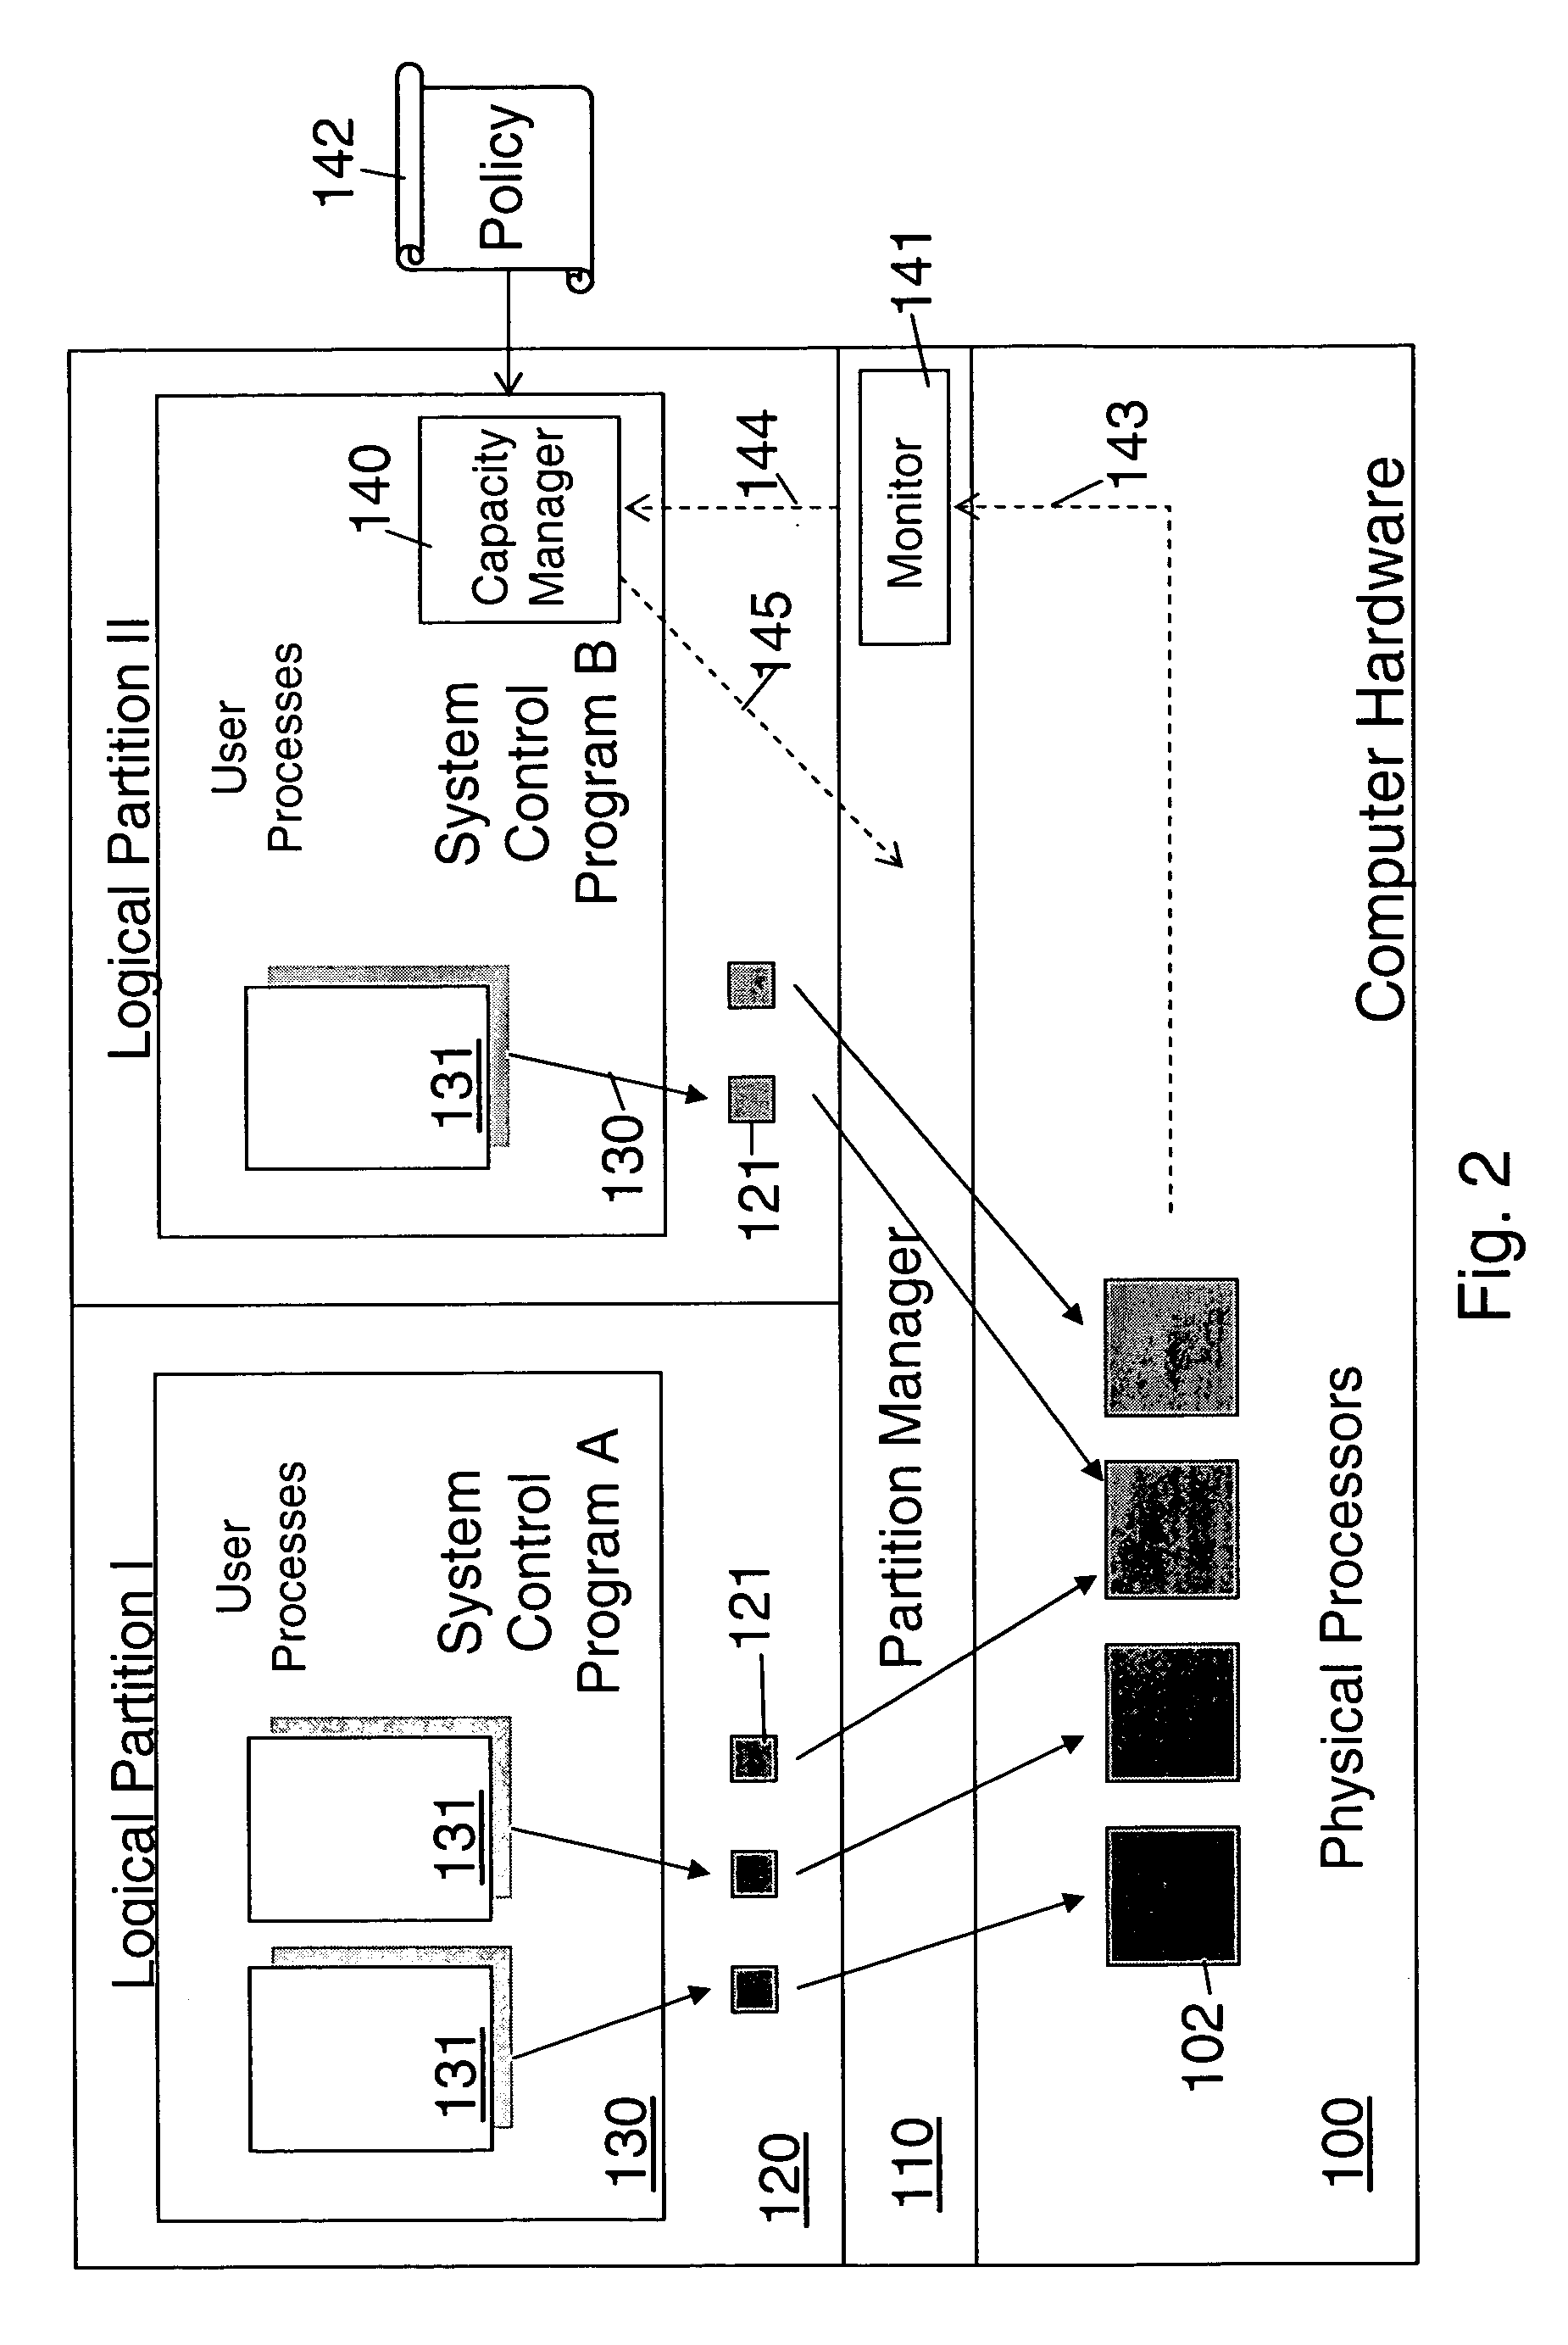 Method for controlling the capacity usage of a logically partitioned data processing system